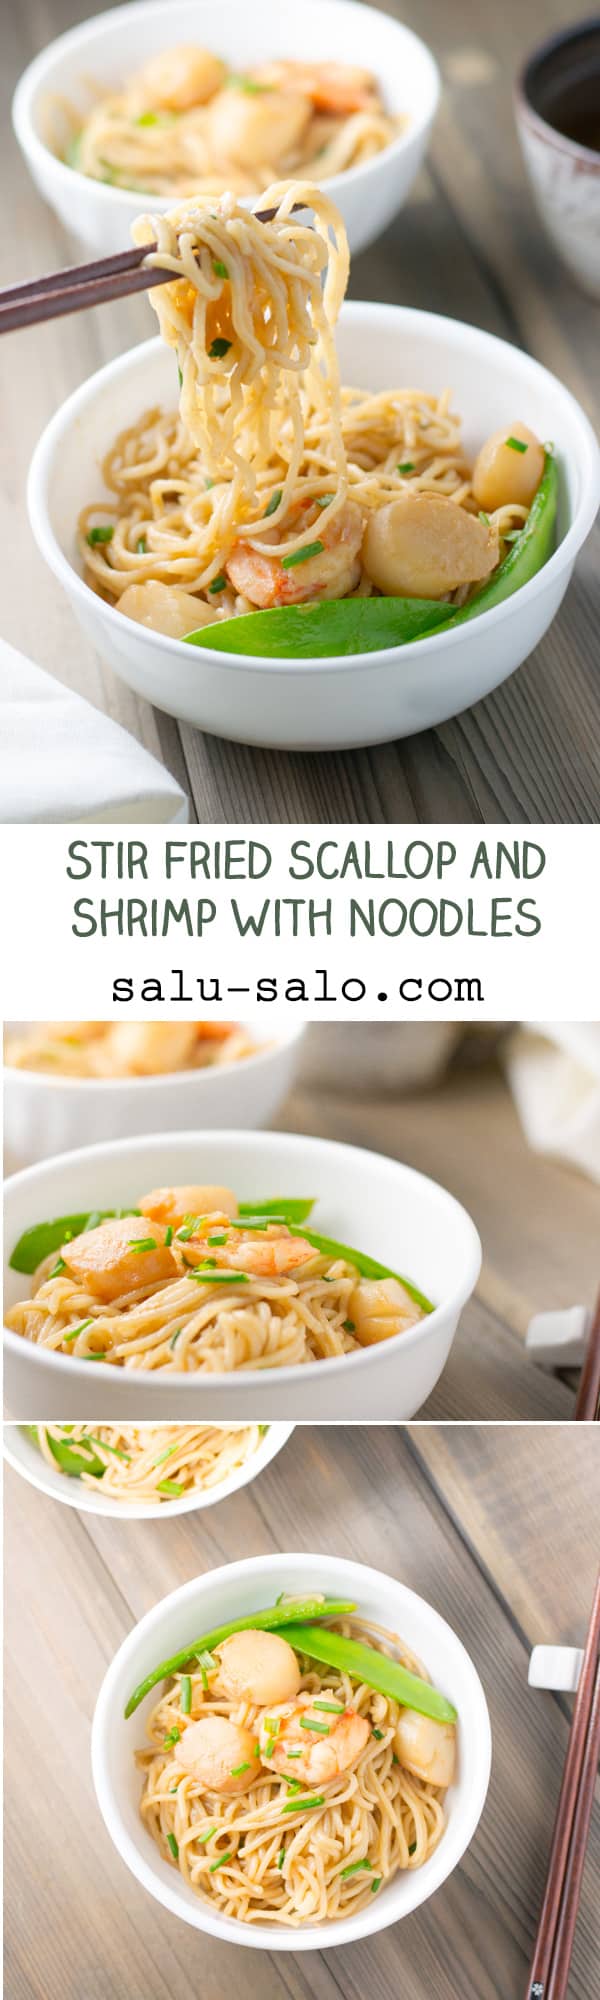 In this stir fried scallop and shrimp noodles dish, scallop & shrimp was marinated in soy sauce, sherry, sesame oil & vegetable oil and then stir-fried